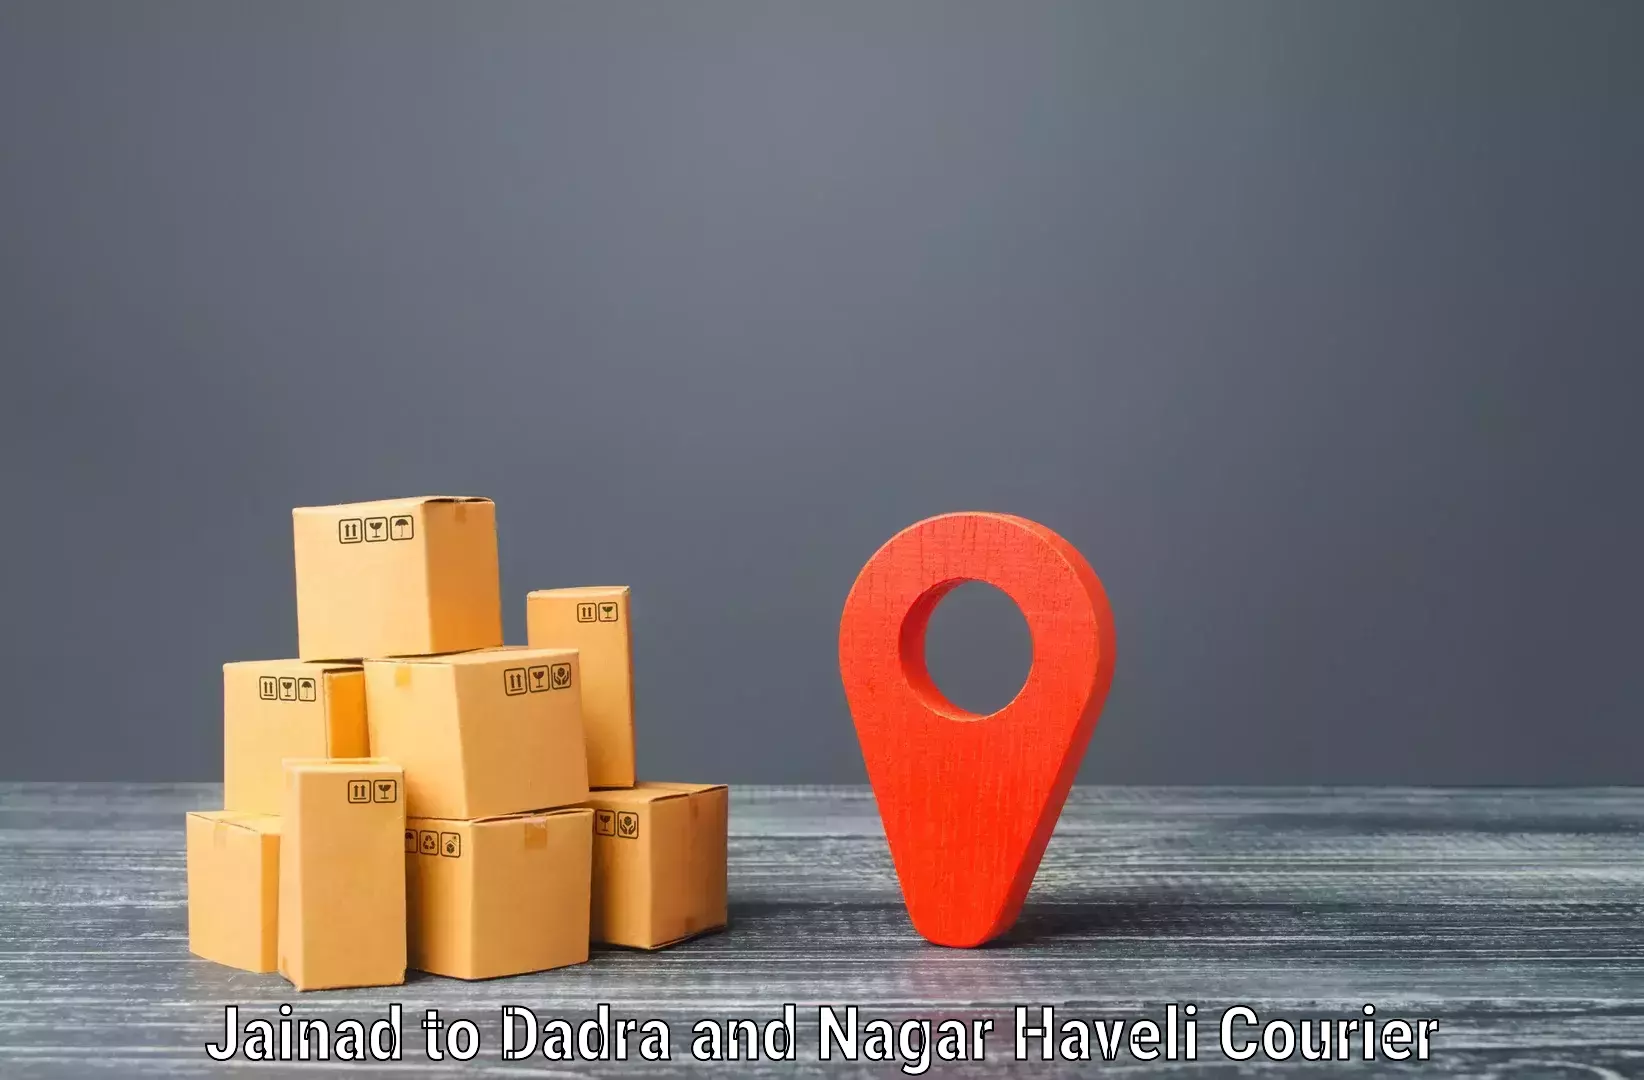 Air courier services Jainad to Dadra and Nagar Haveli